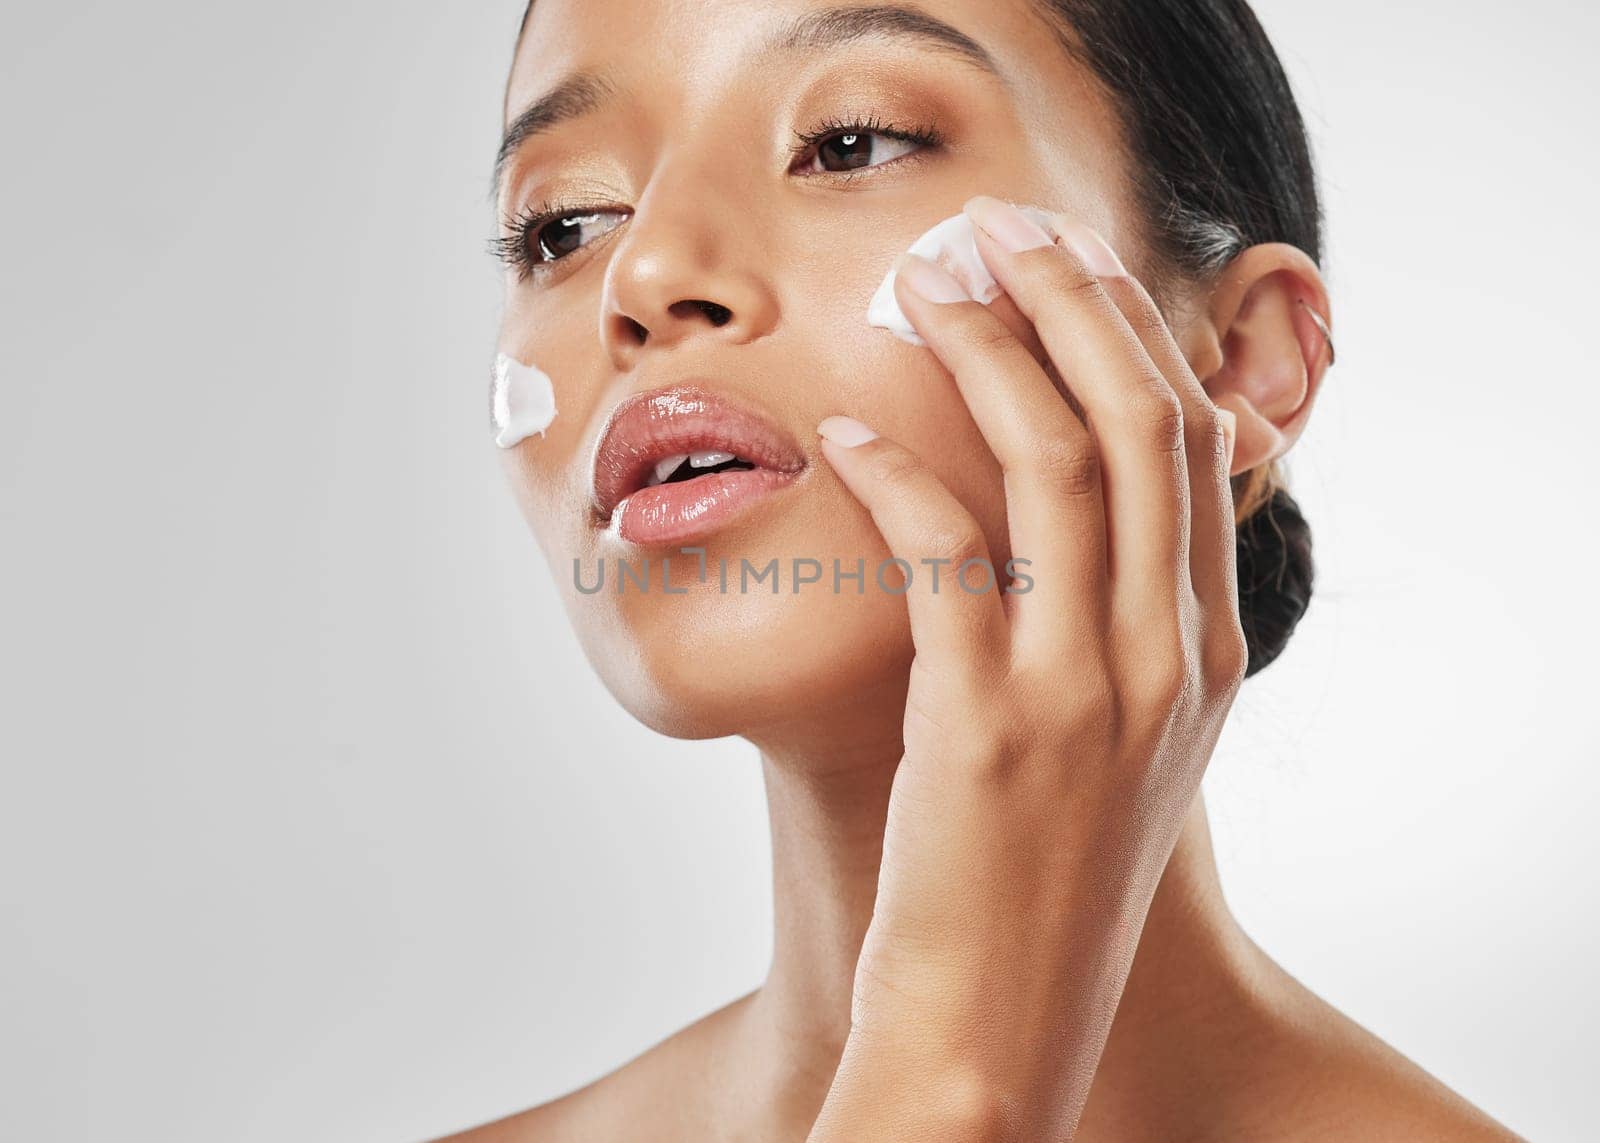 Refining texture and tone. Studio shot of an attractive young woman applying moisturiser on her face against a grey background